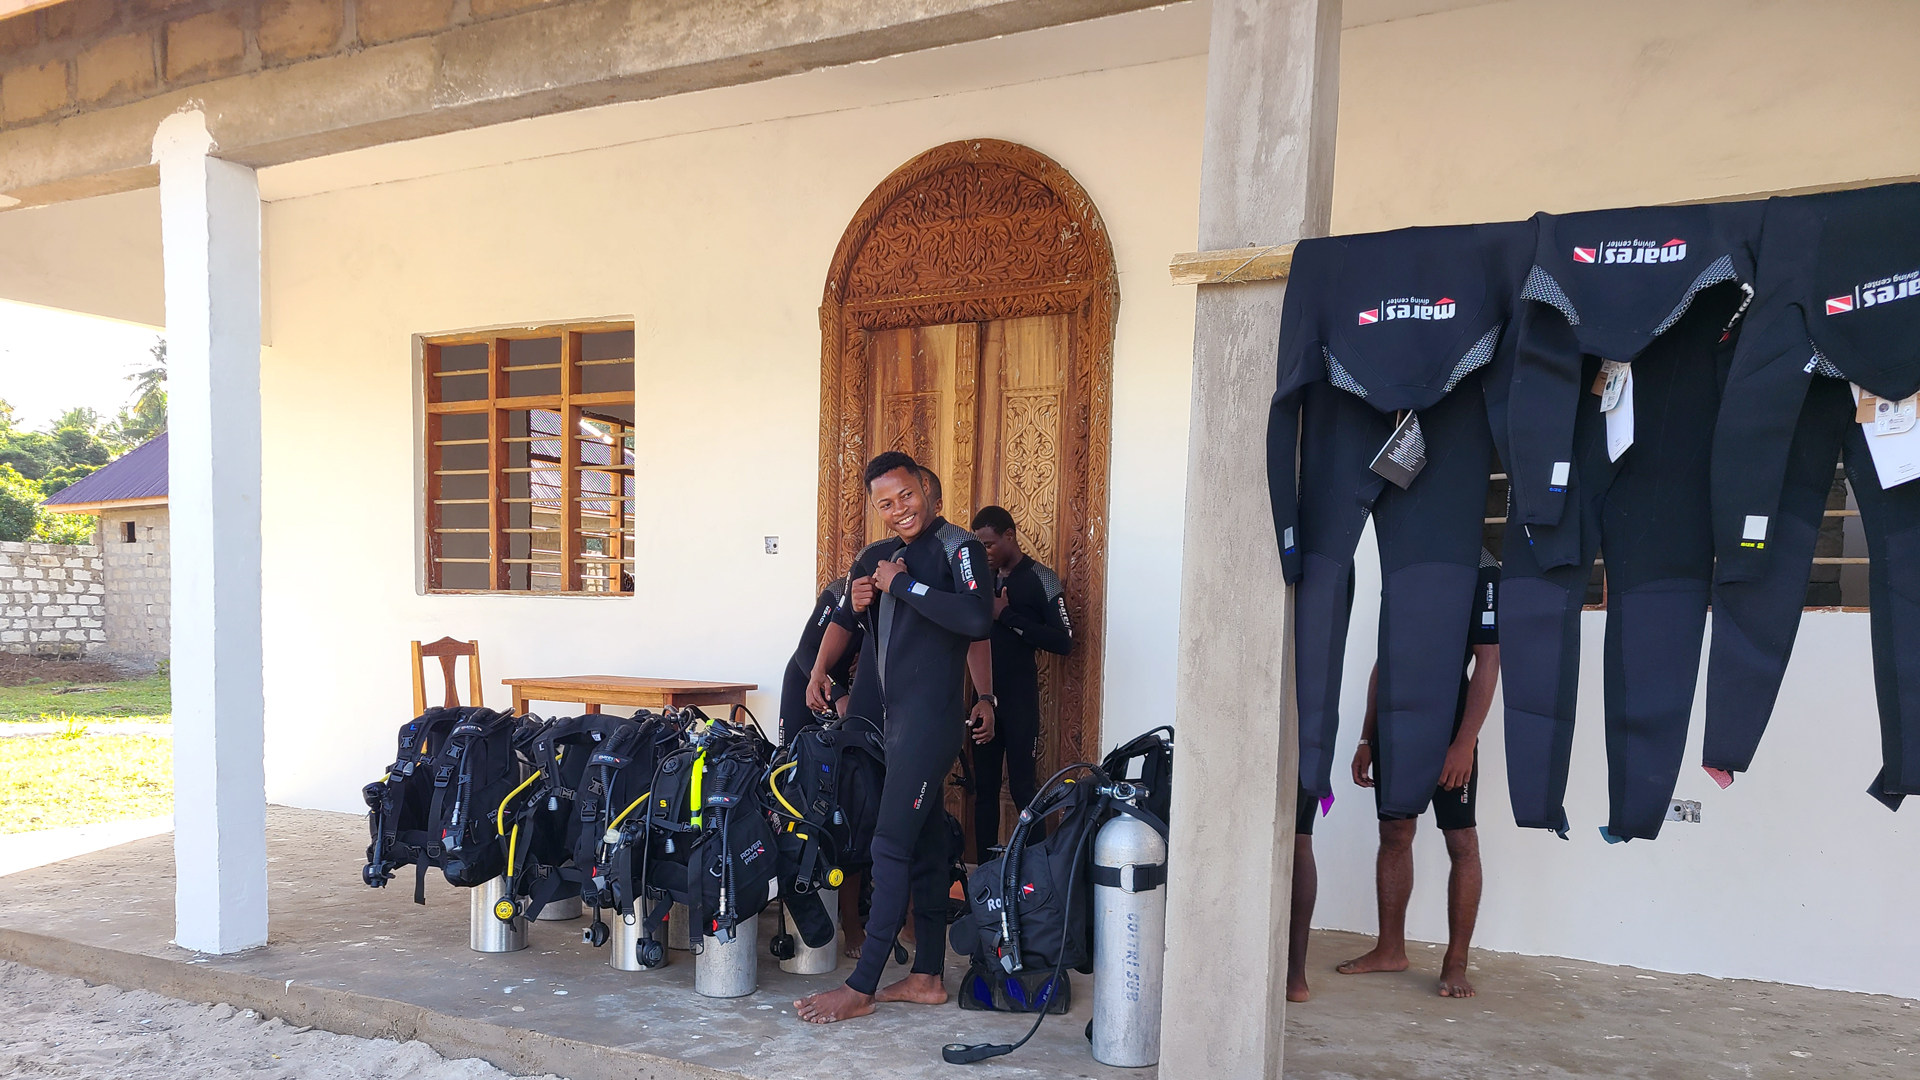 Explore Pemba’s reefs with local PADI pros. Our brand new dive center on Pemba Island is now open. Book your underwater adventure today!